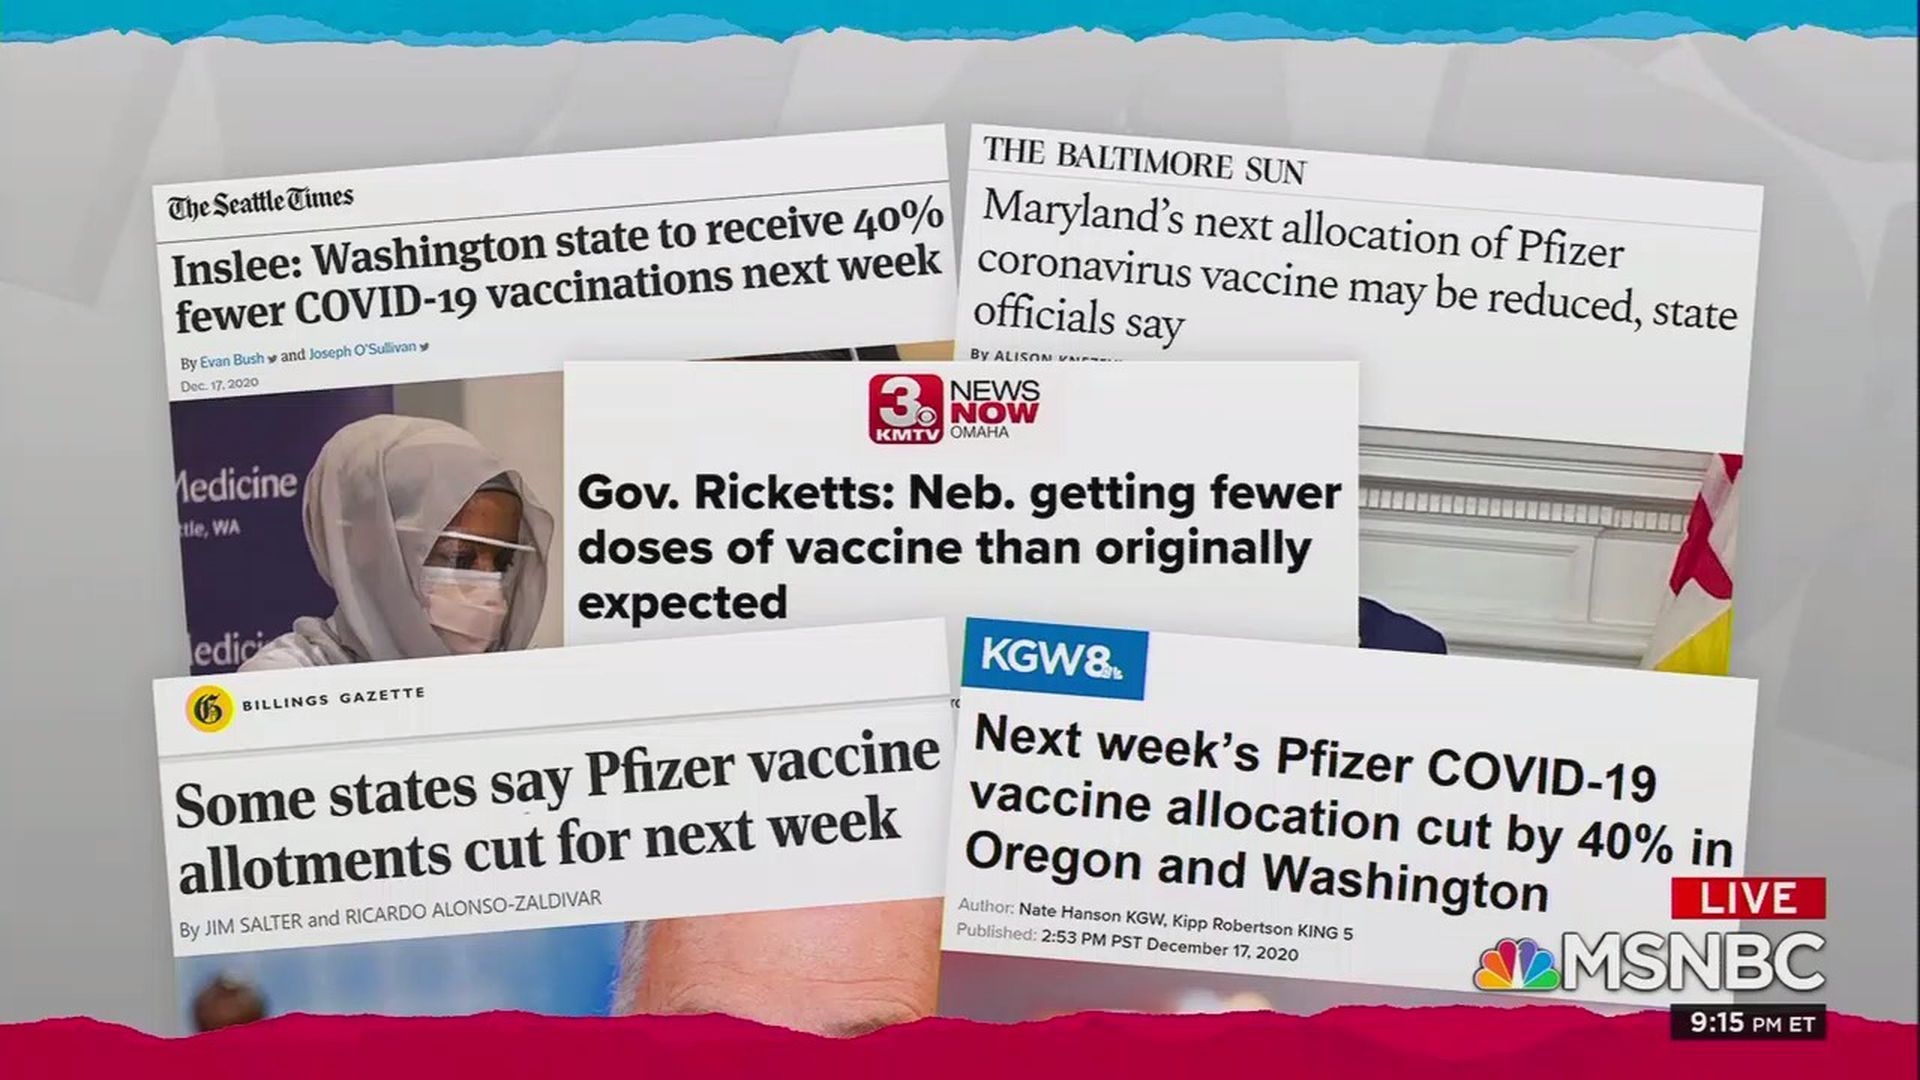 Screenshot of "The Rachel Maddow Show" showing several headlines about the coronavirus vaccine in different states